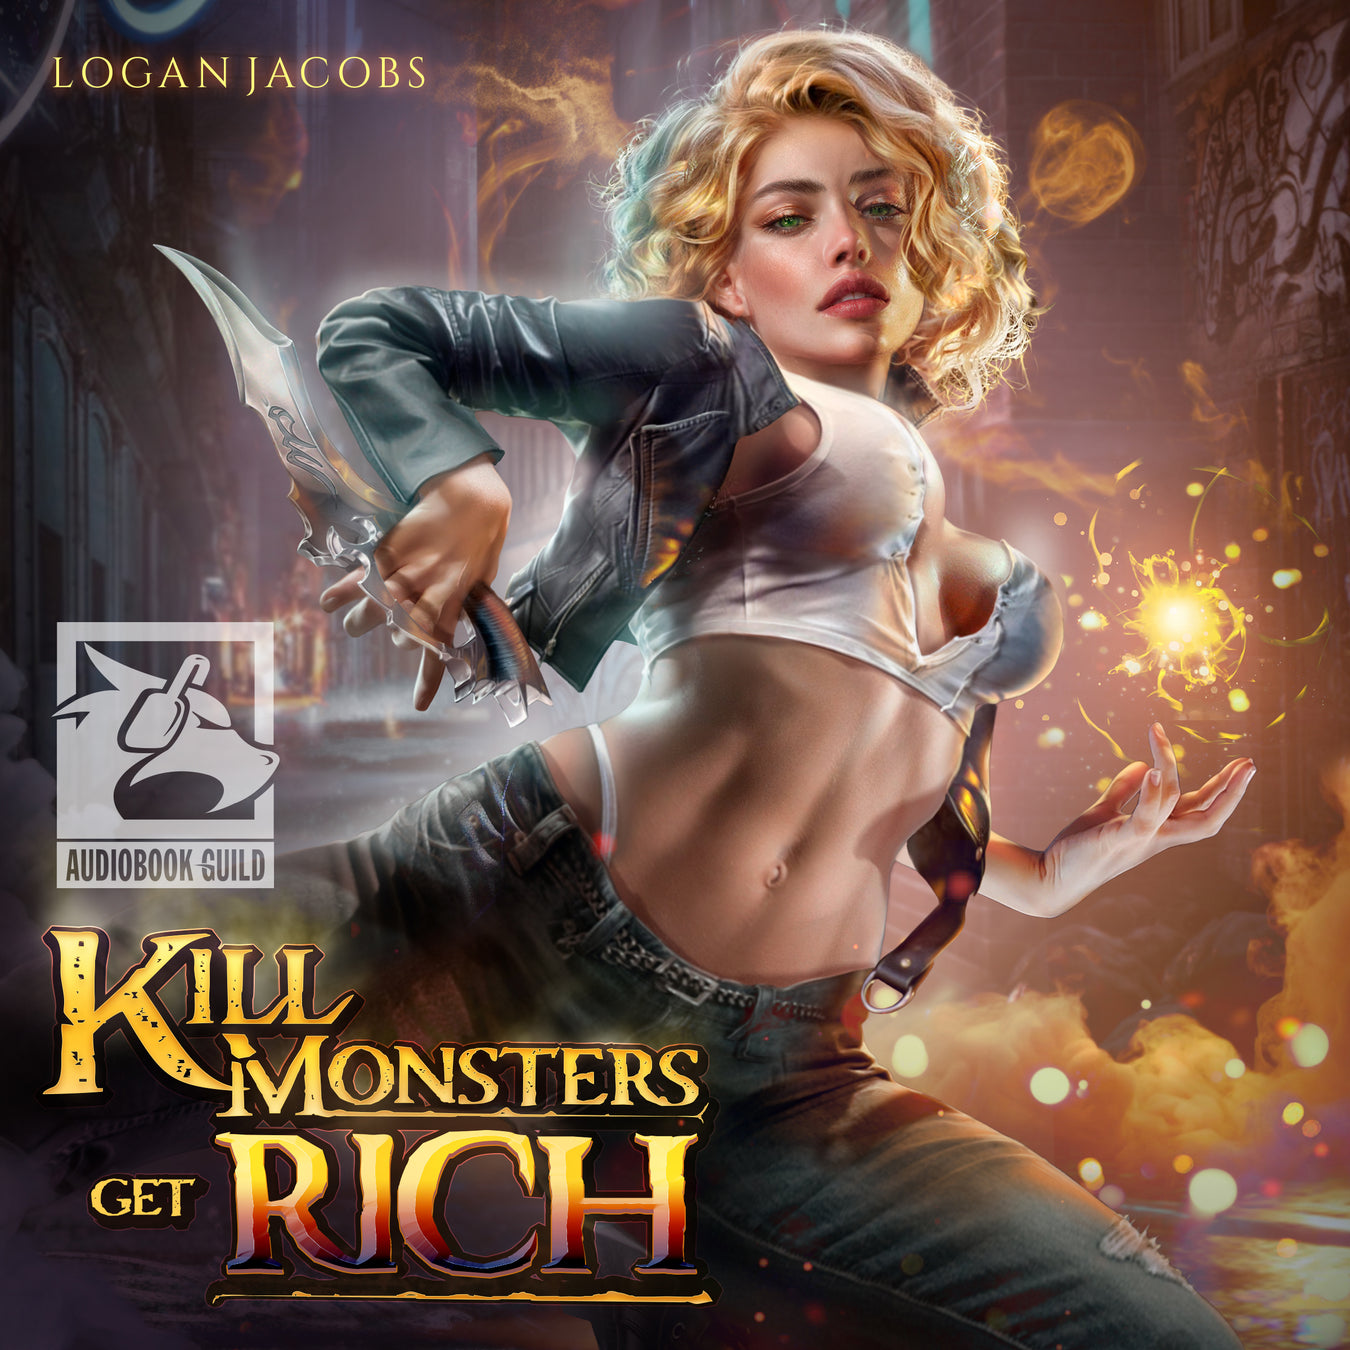 Kill Monsters Get Rich by Logan Jacobs